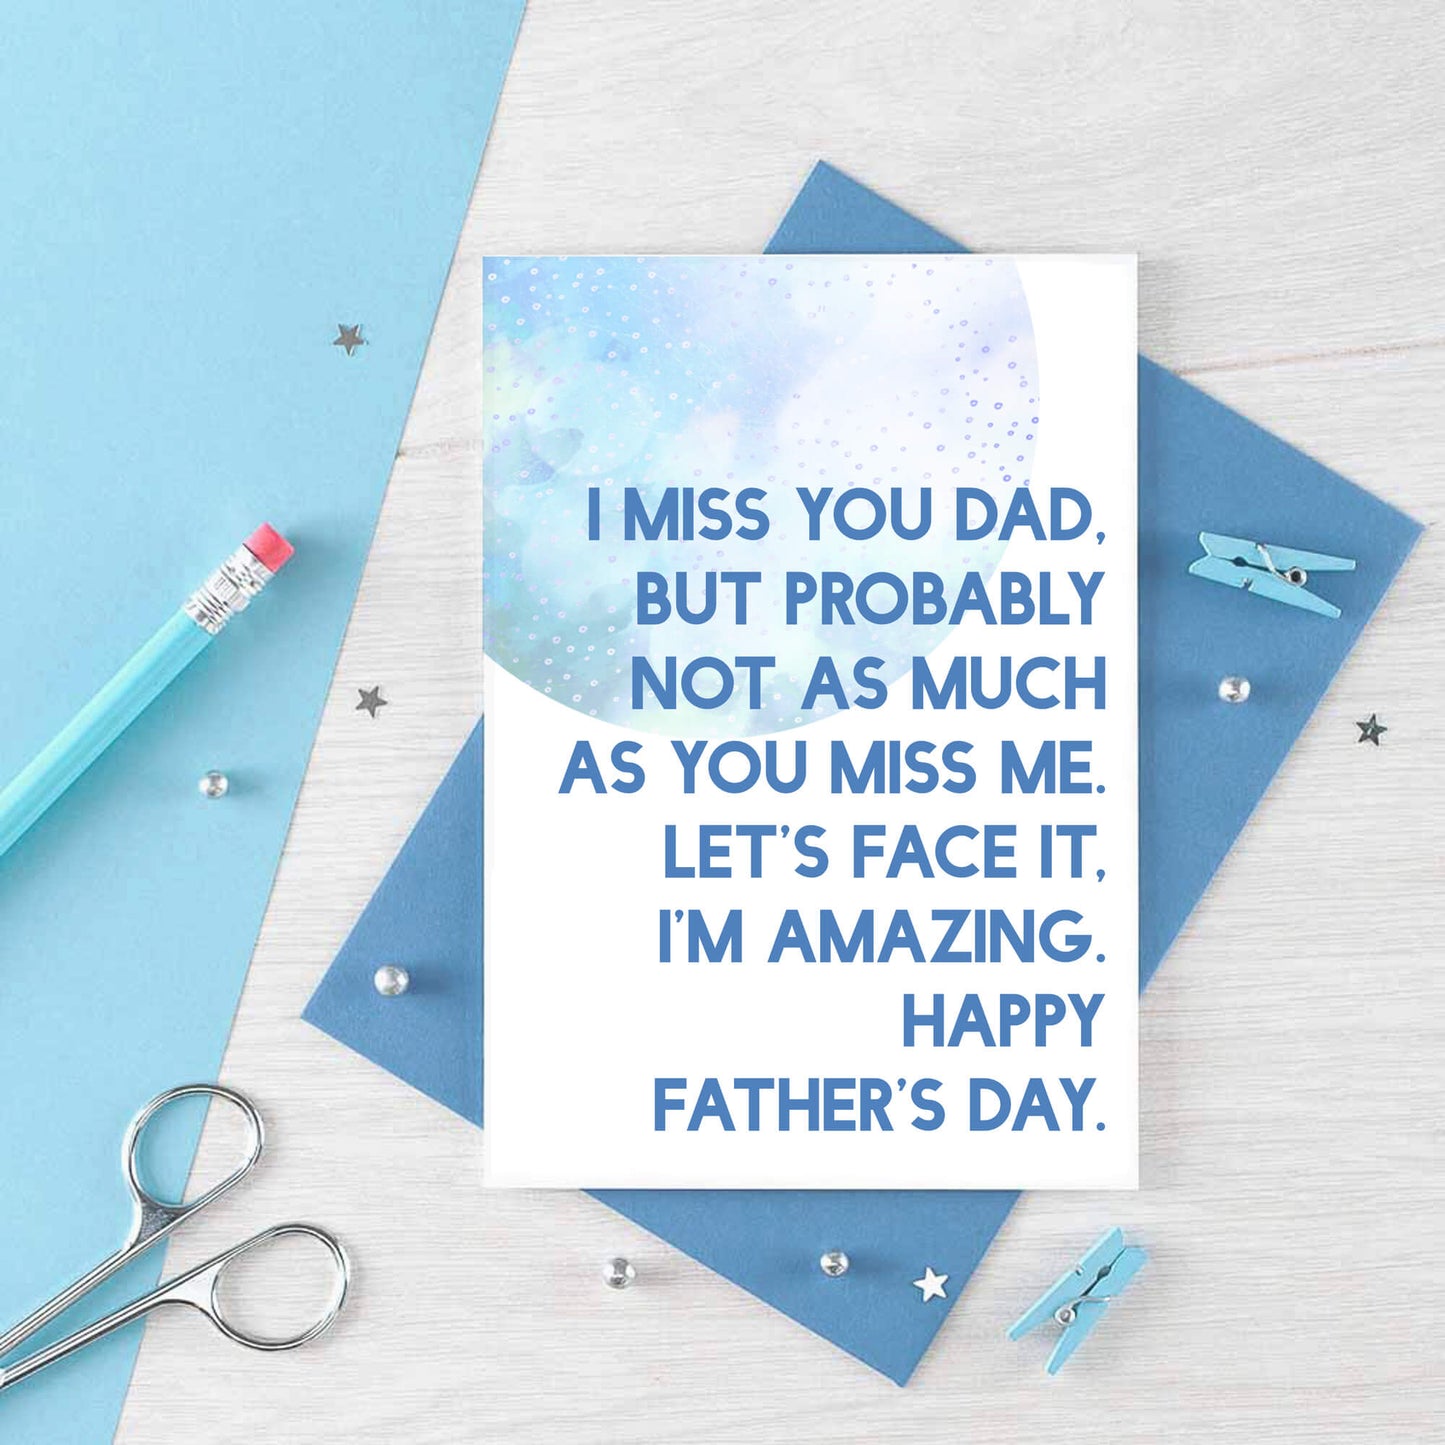 Father's Day Card by SixElevenCreations. Reads I miss you Dad. But probably not as much as you miss me. Let's face it, I'm amazing. Happy Father's Day. Product Code SEF0027A6